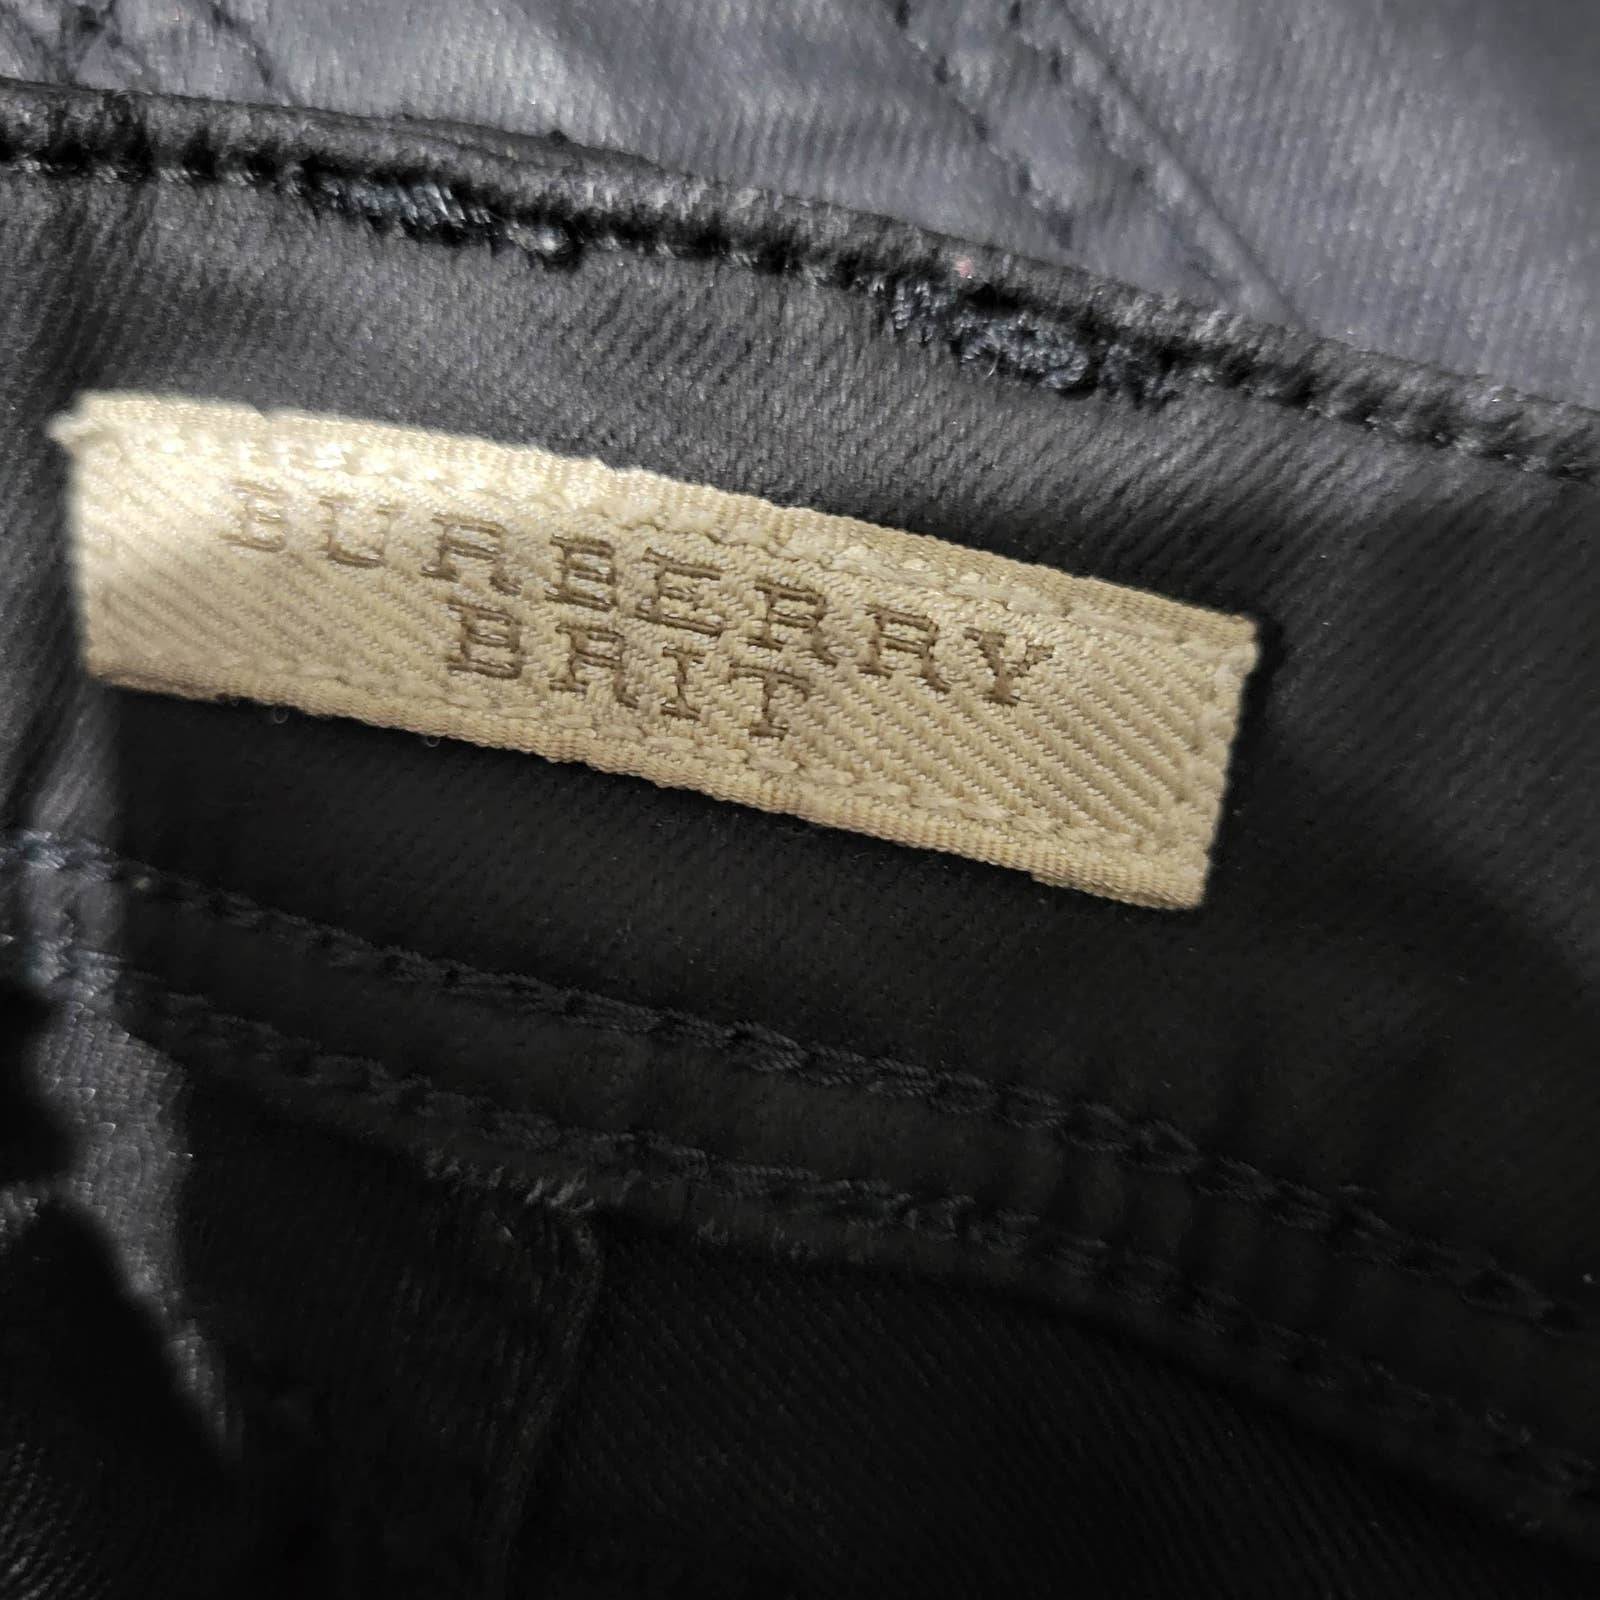 Burberry Brit Pilton Black Jeans Wax Coated Skinny Ankle Faux Leather Size 27